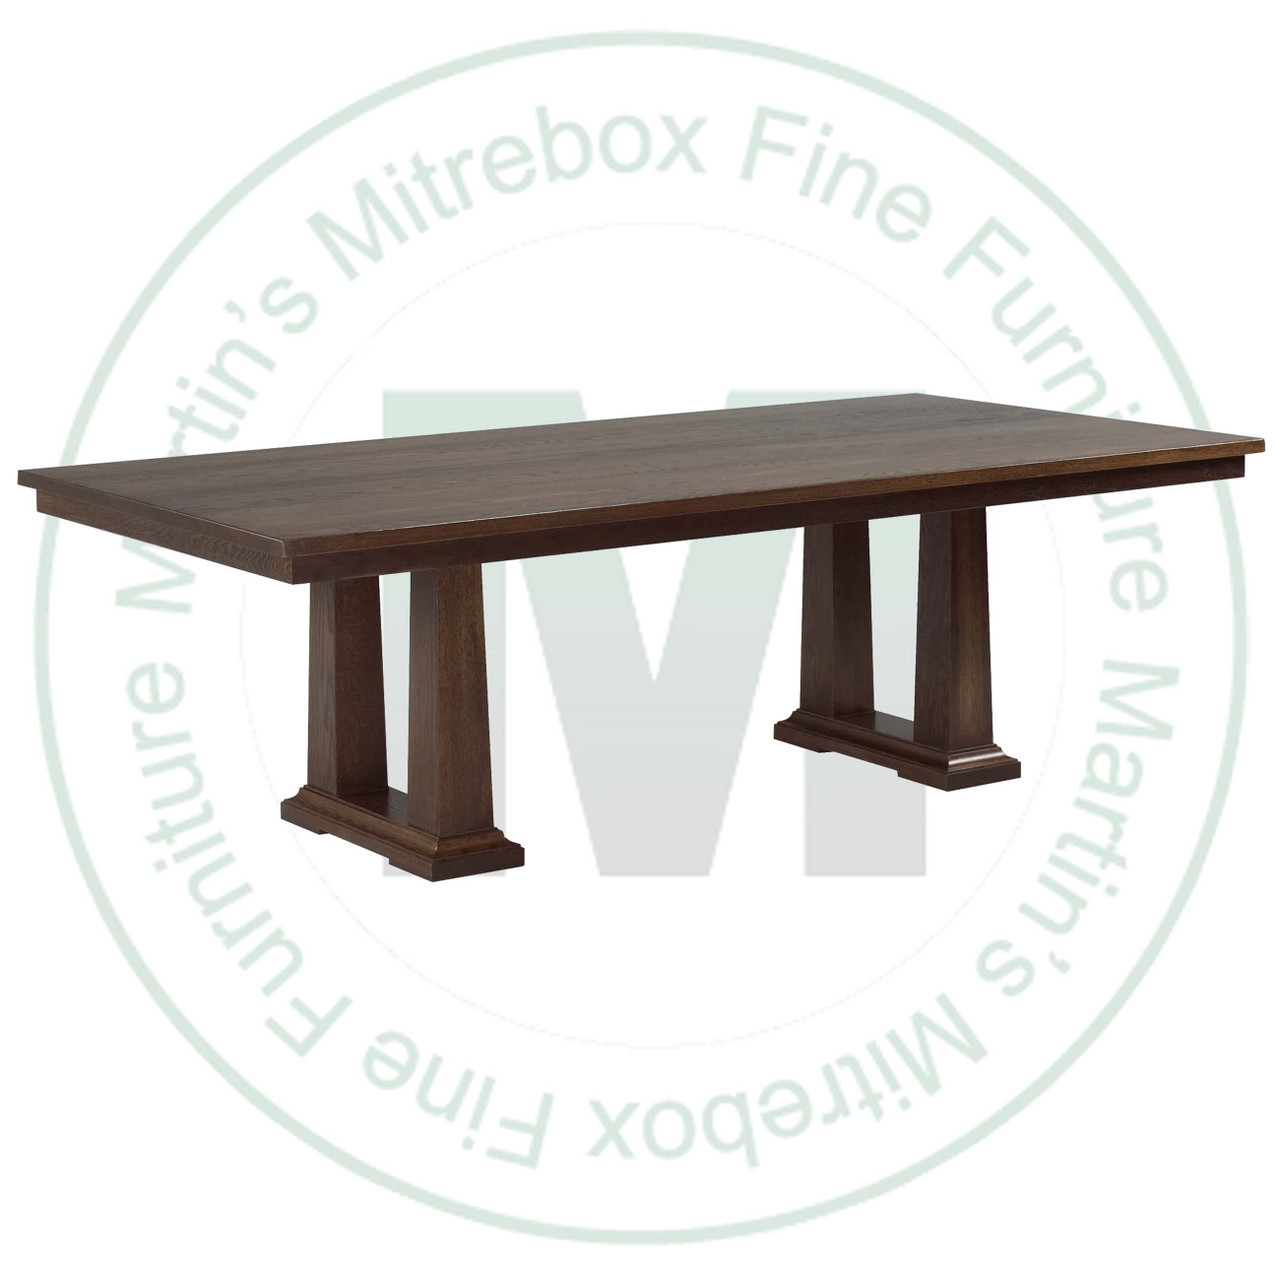 Oak Acropolis Solid Top Double Pedestal Table 48''D x 120''W x 30''H Table Has 1.25'' Thick Top With 16'' Extensions.